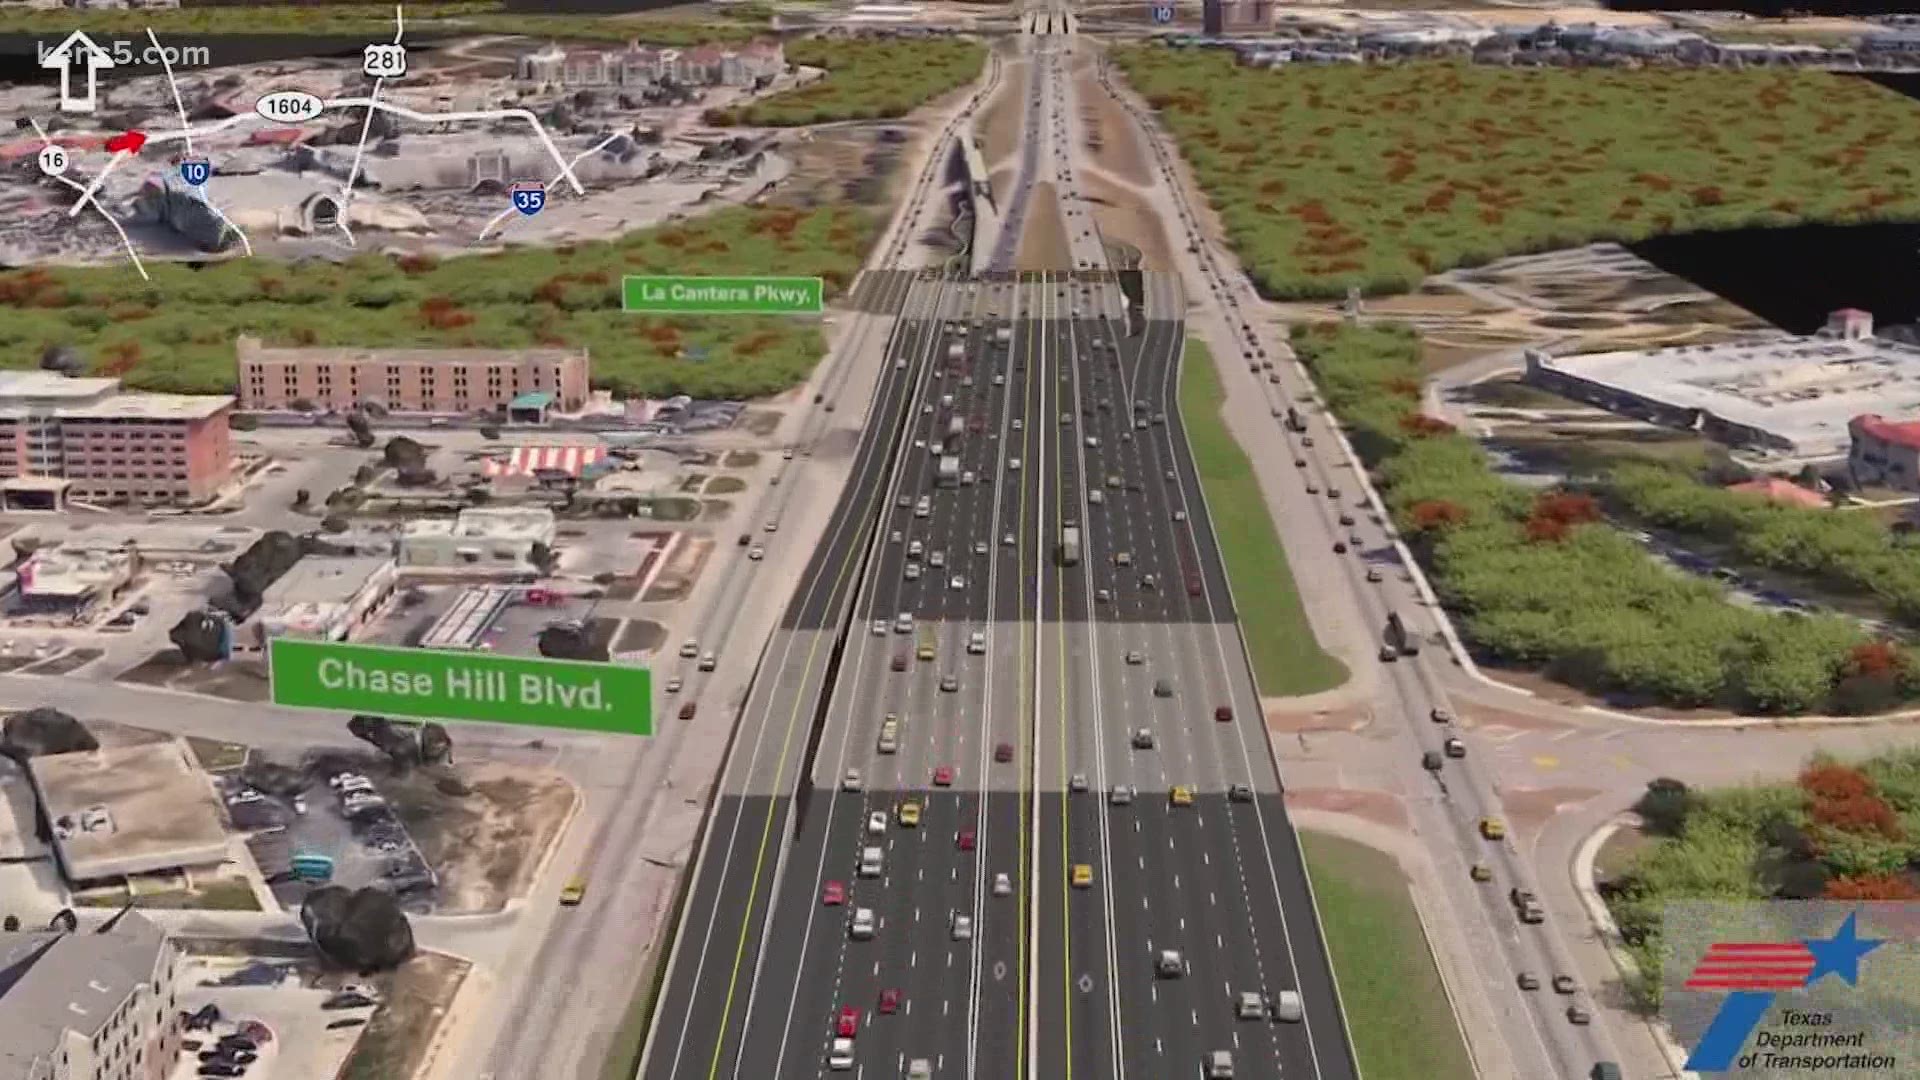 The construction will lead to an increase of lanes from Bandera Road to I-35 – resulting in a 10-lane expressway when it's complete.